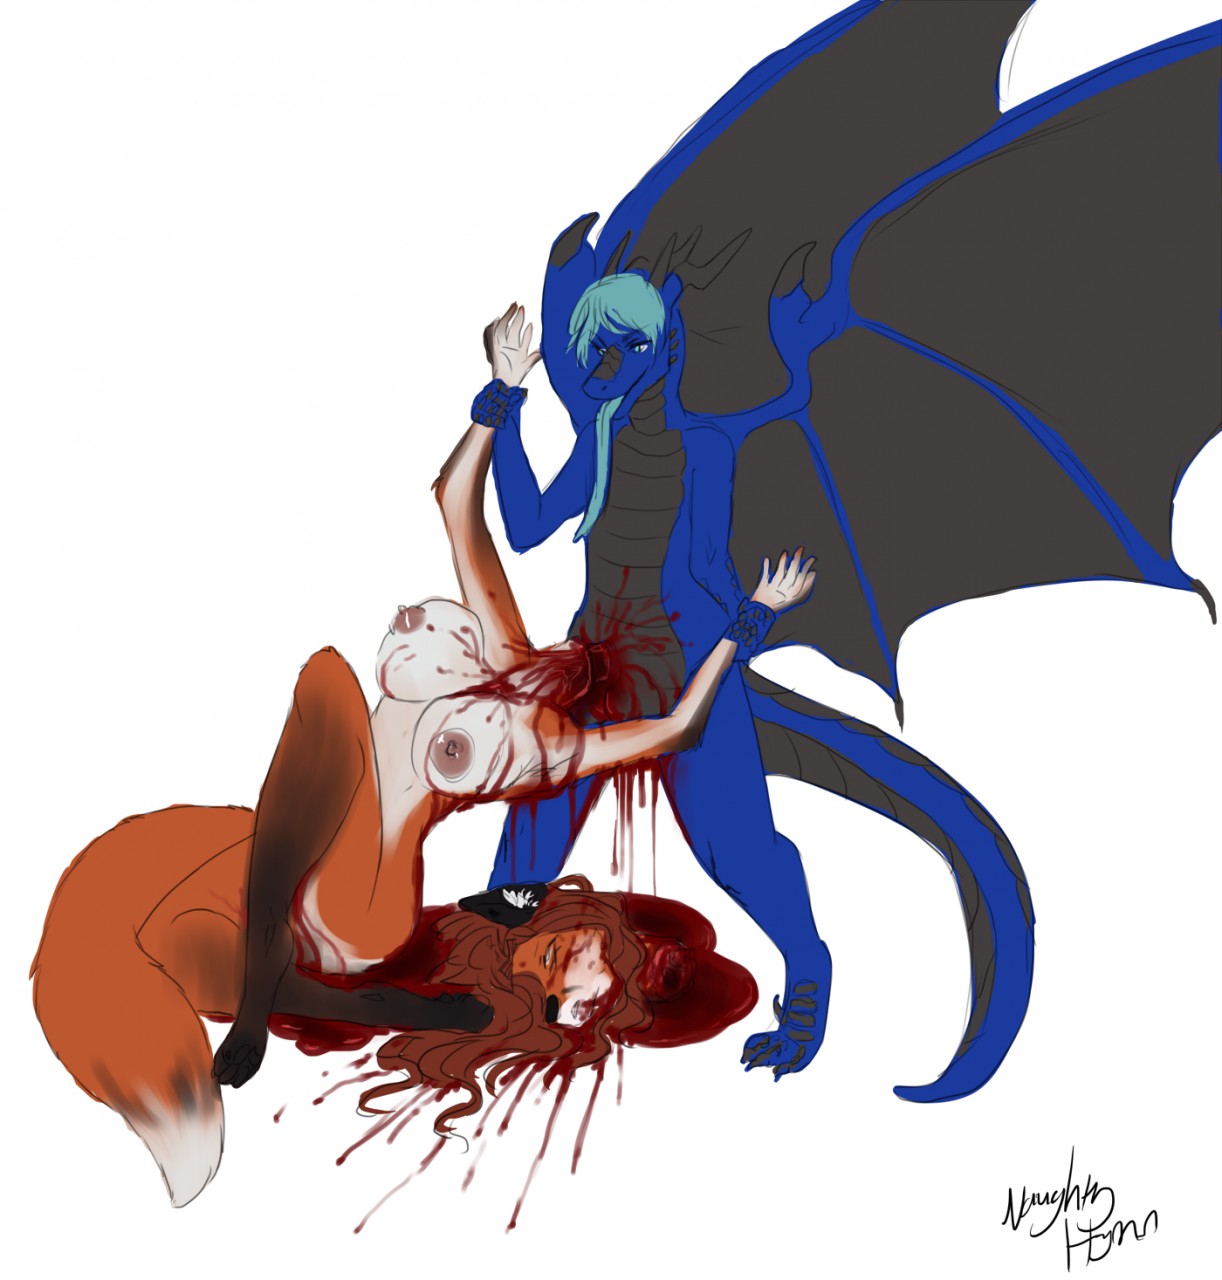 1541905797.sexydragon201_commission_jermey.png